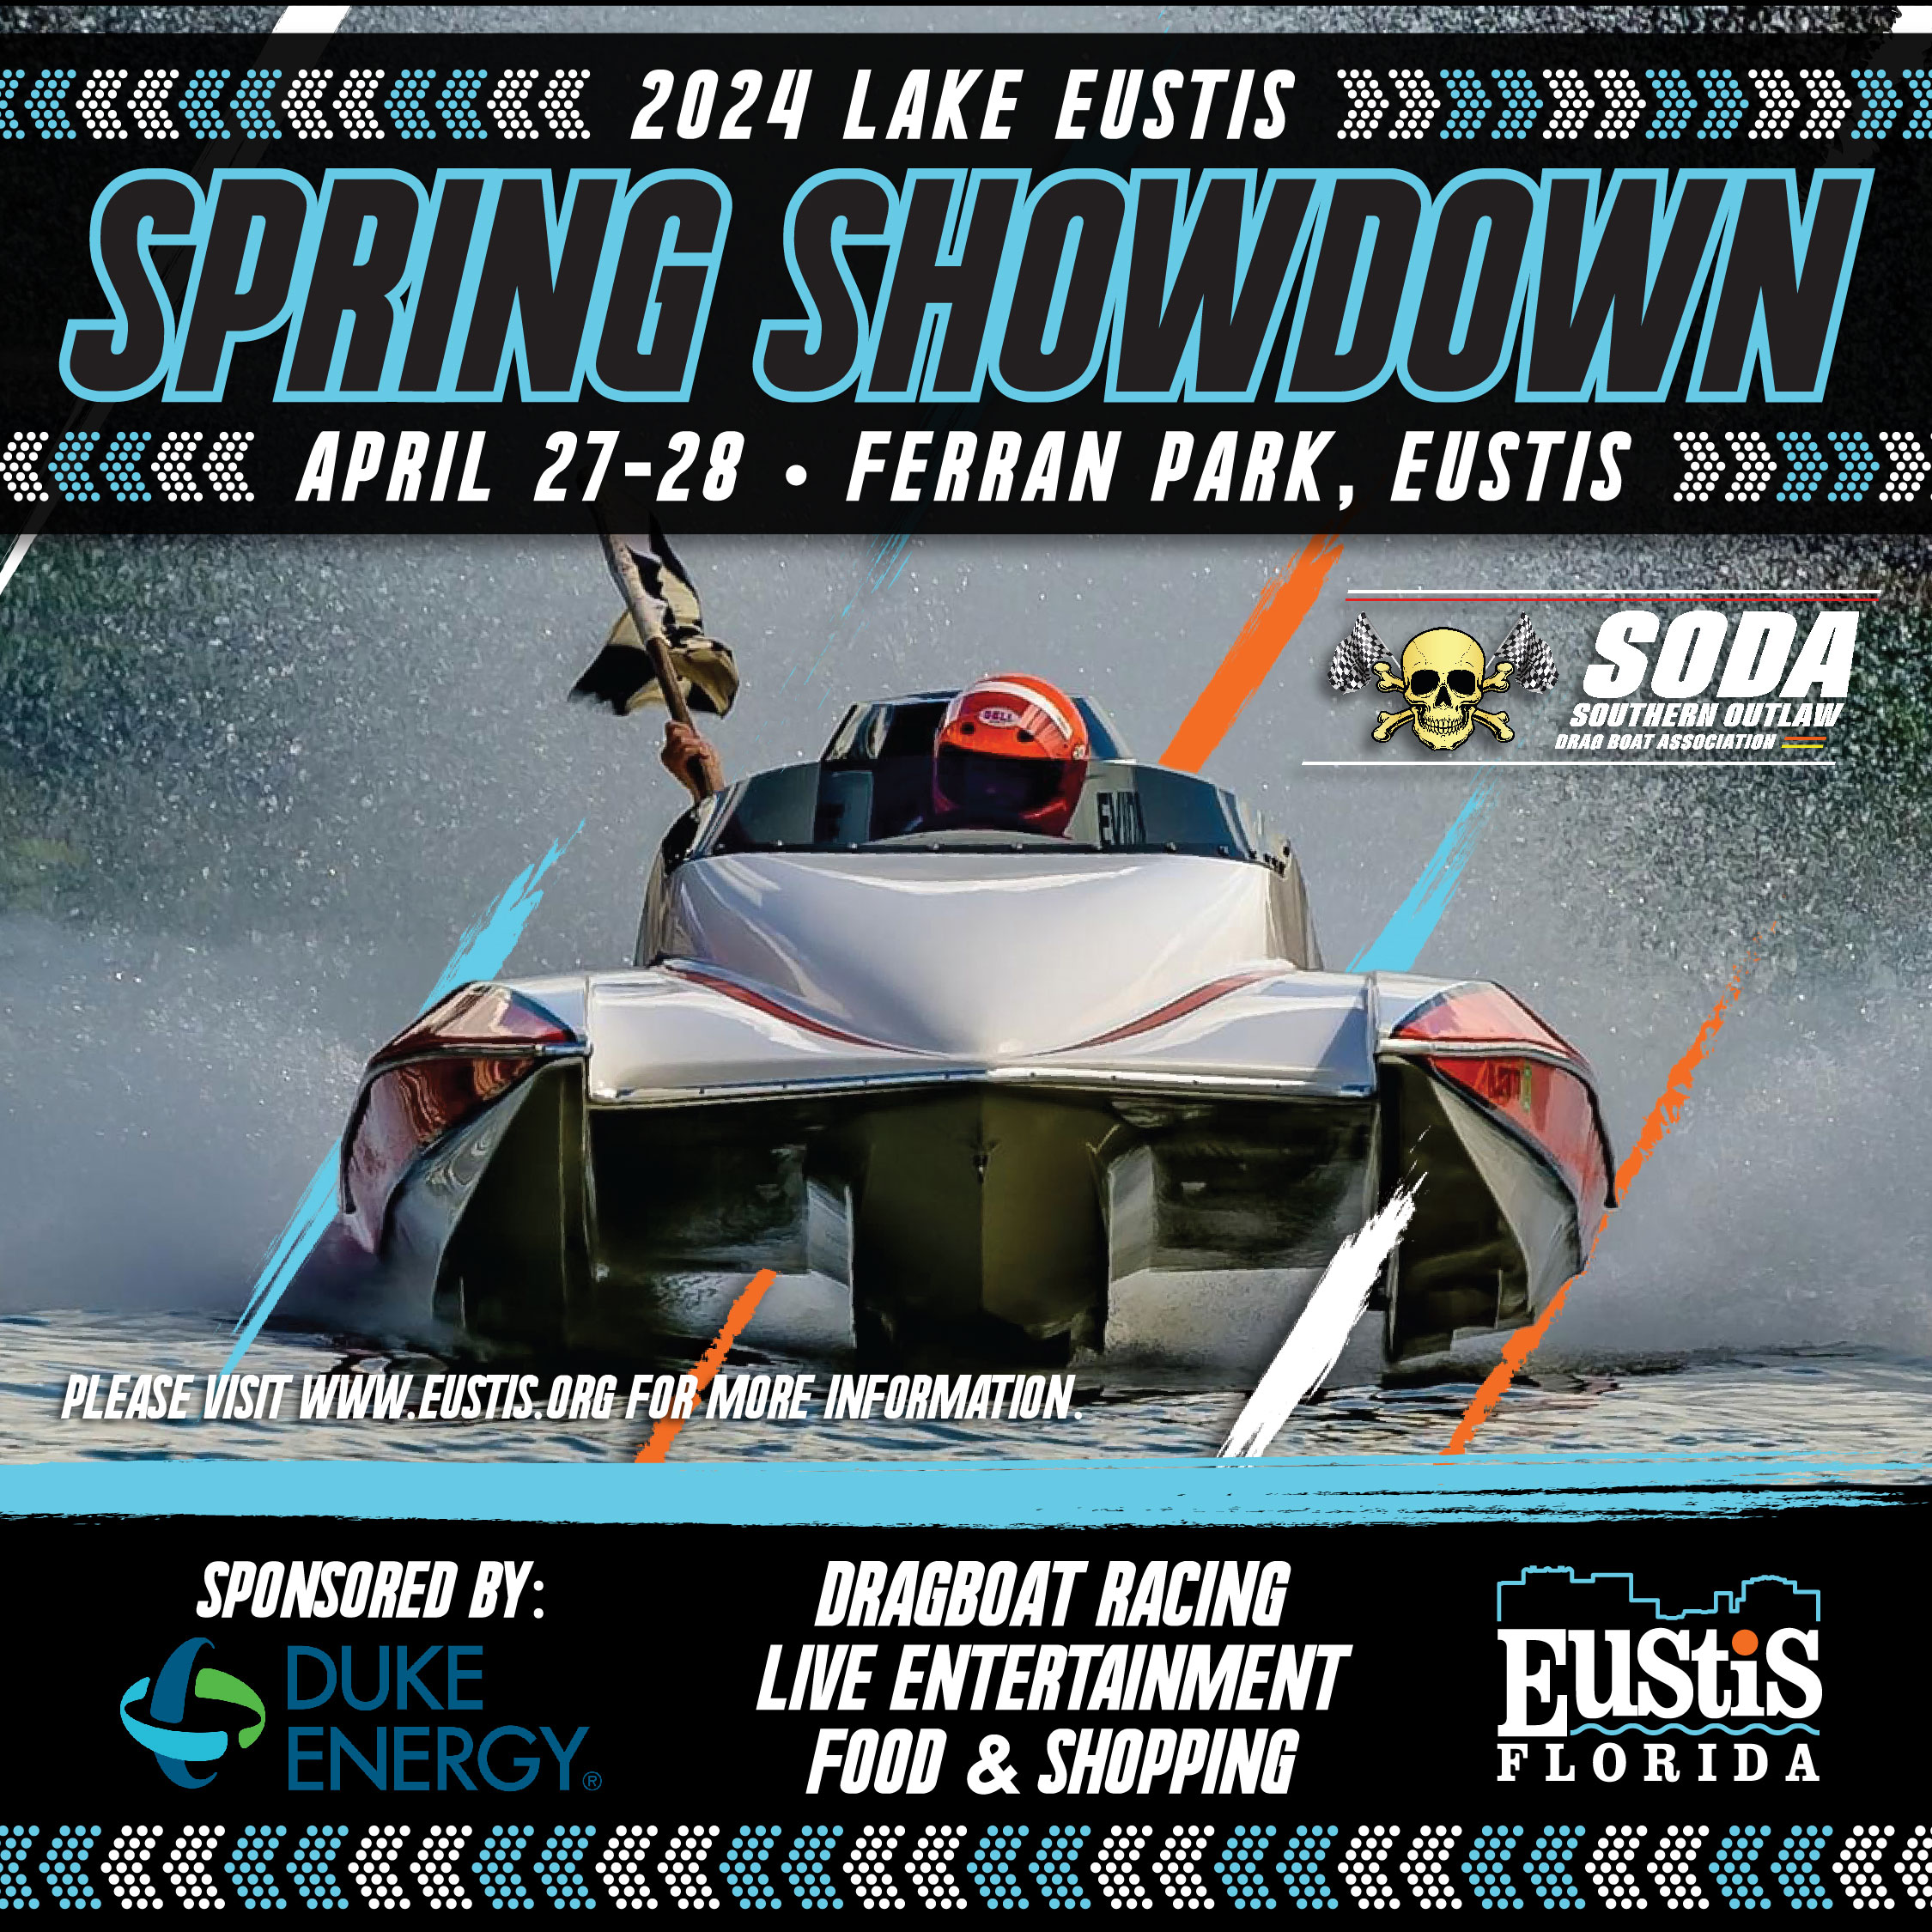 Flyer for the Drag Boat races taking place April 27-28, 2024